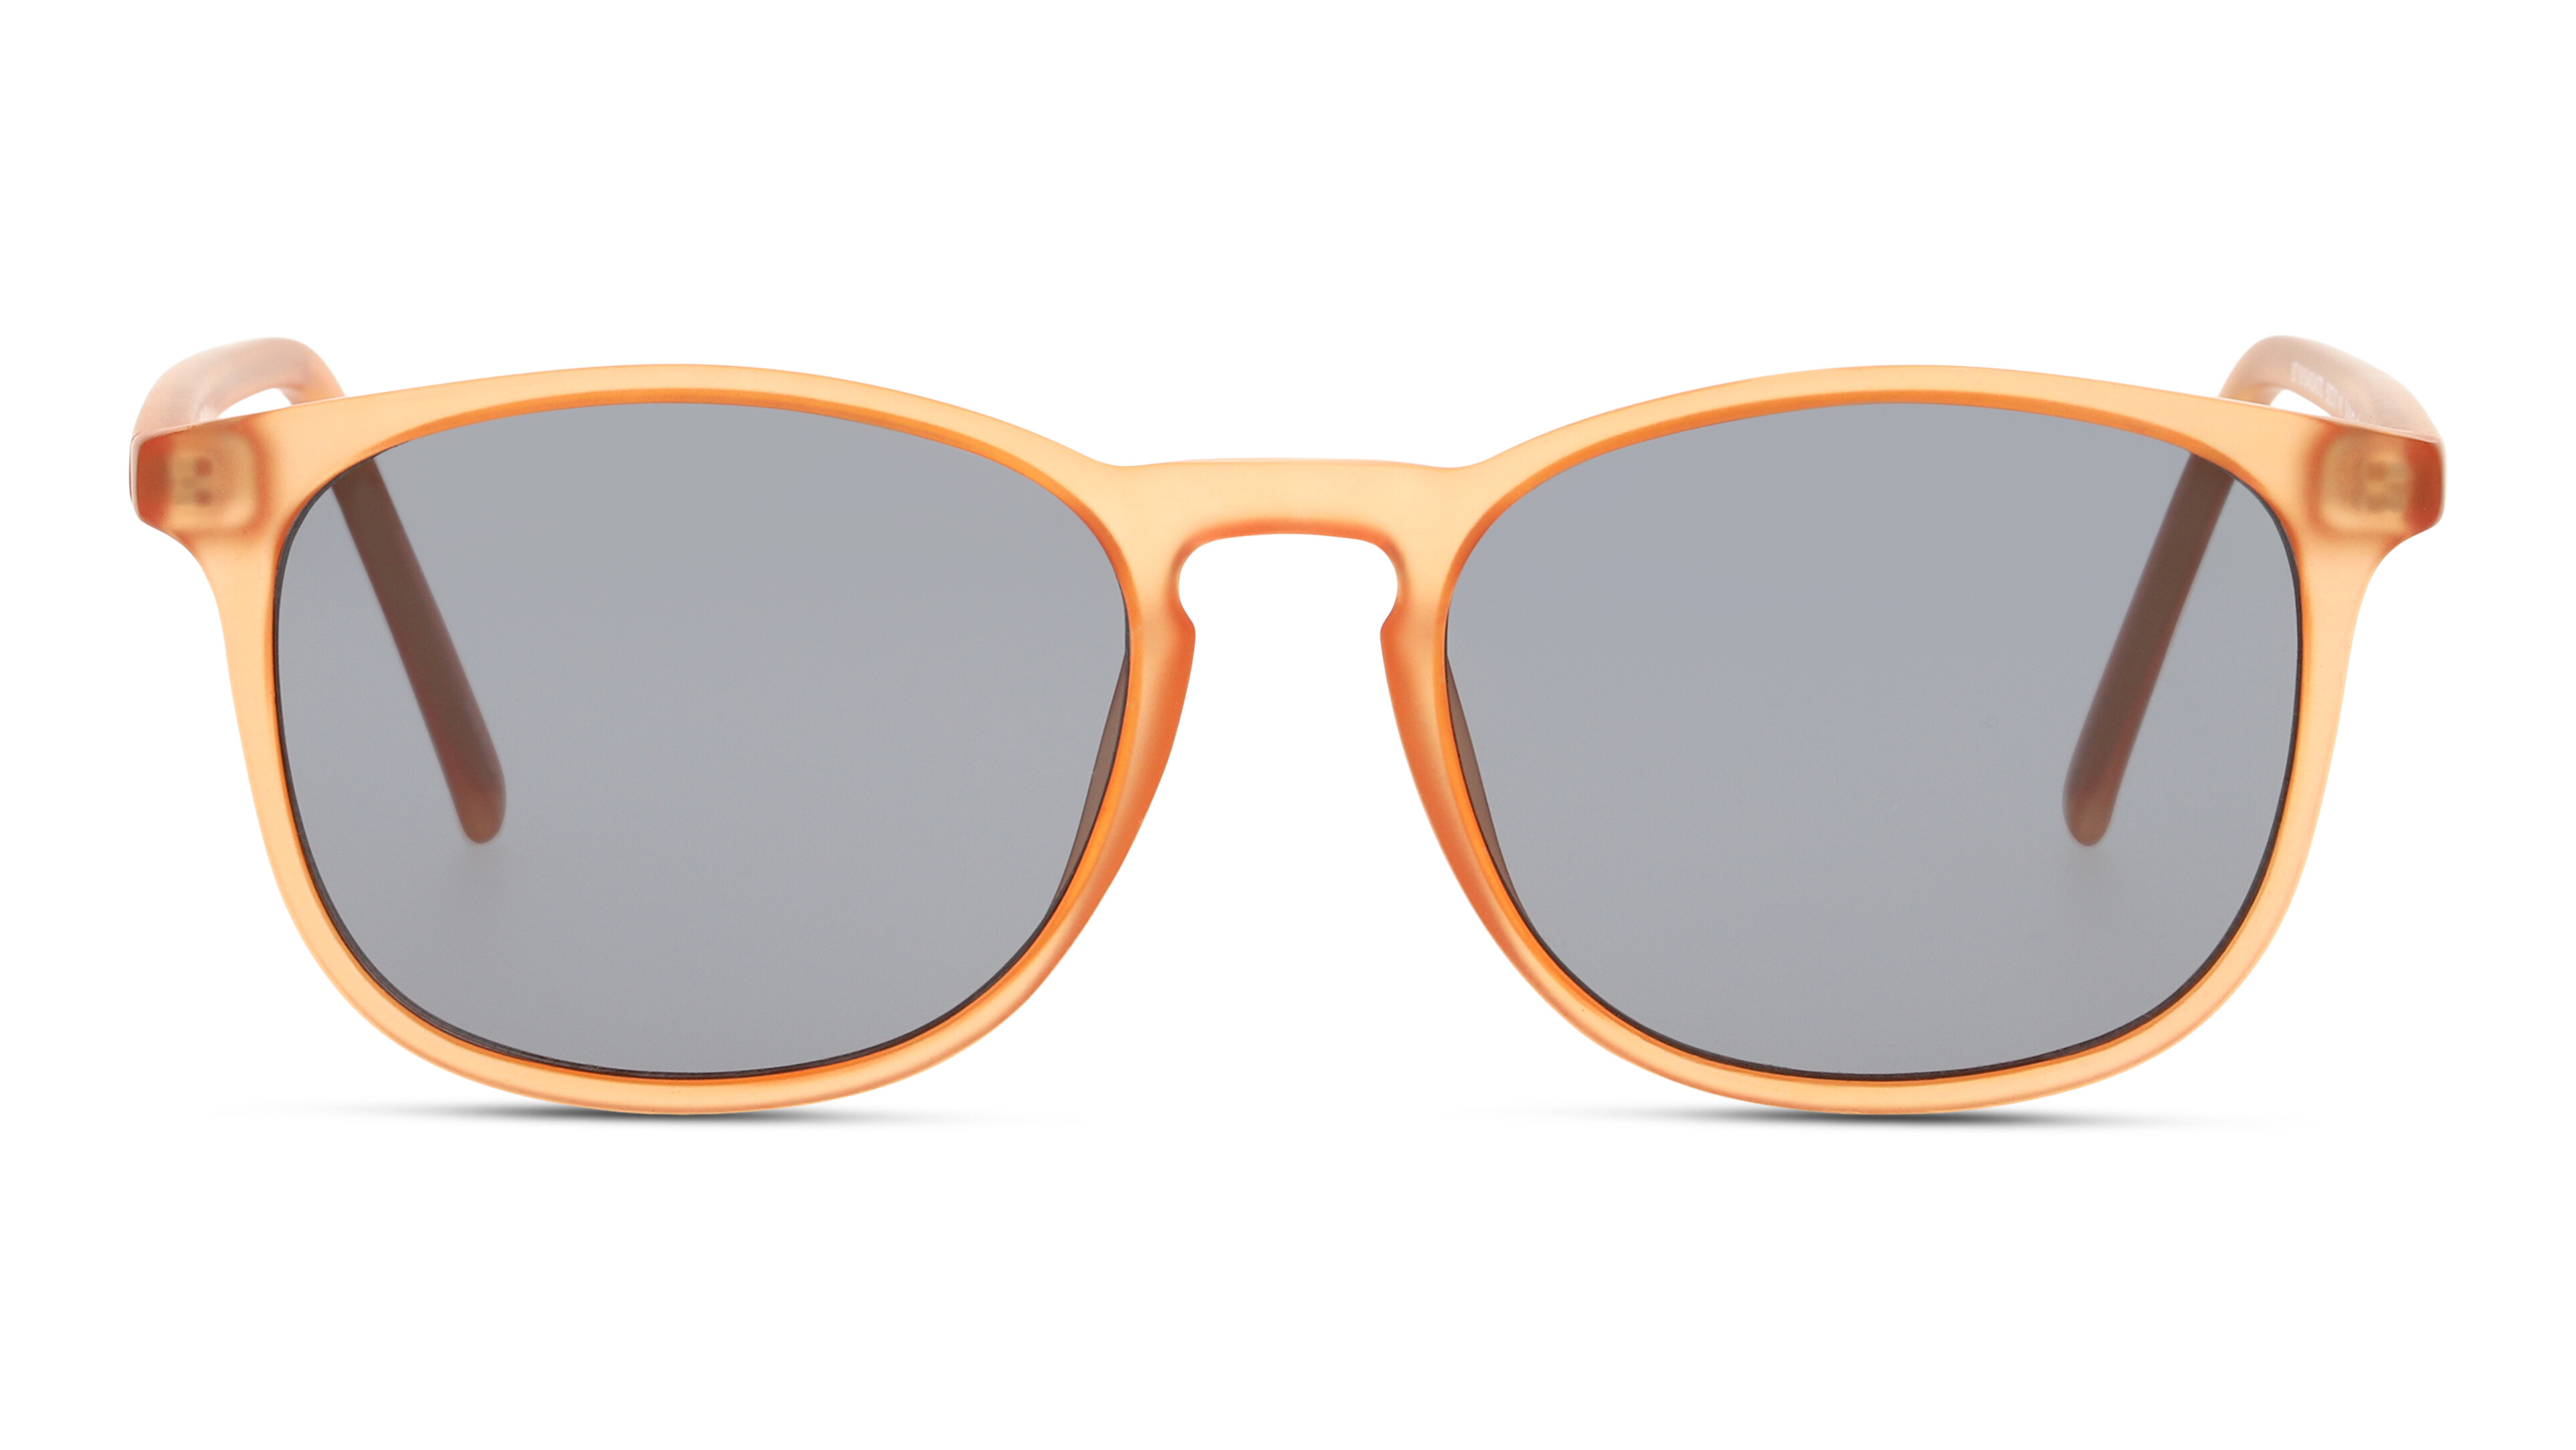 [products.image.front] Seen SNSU0020 OOG0 Sonnenbrille